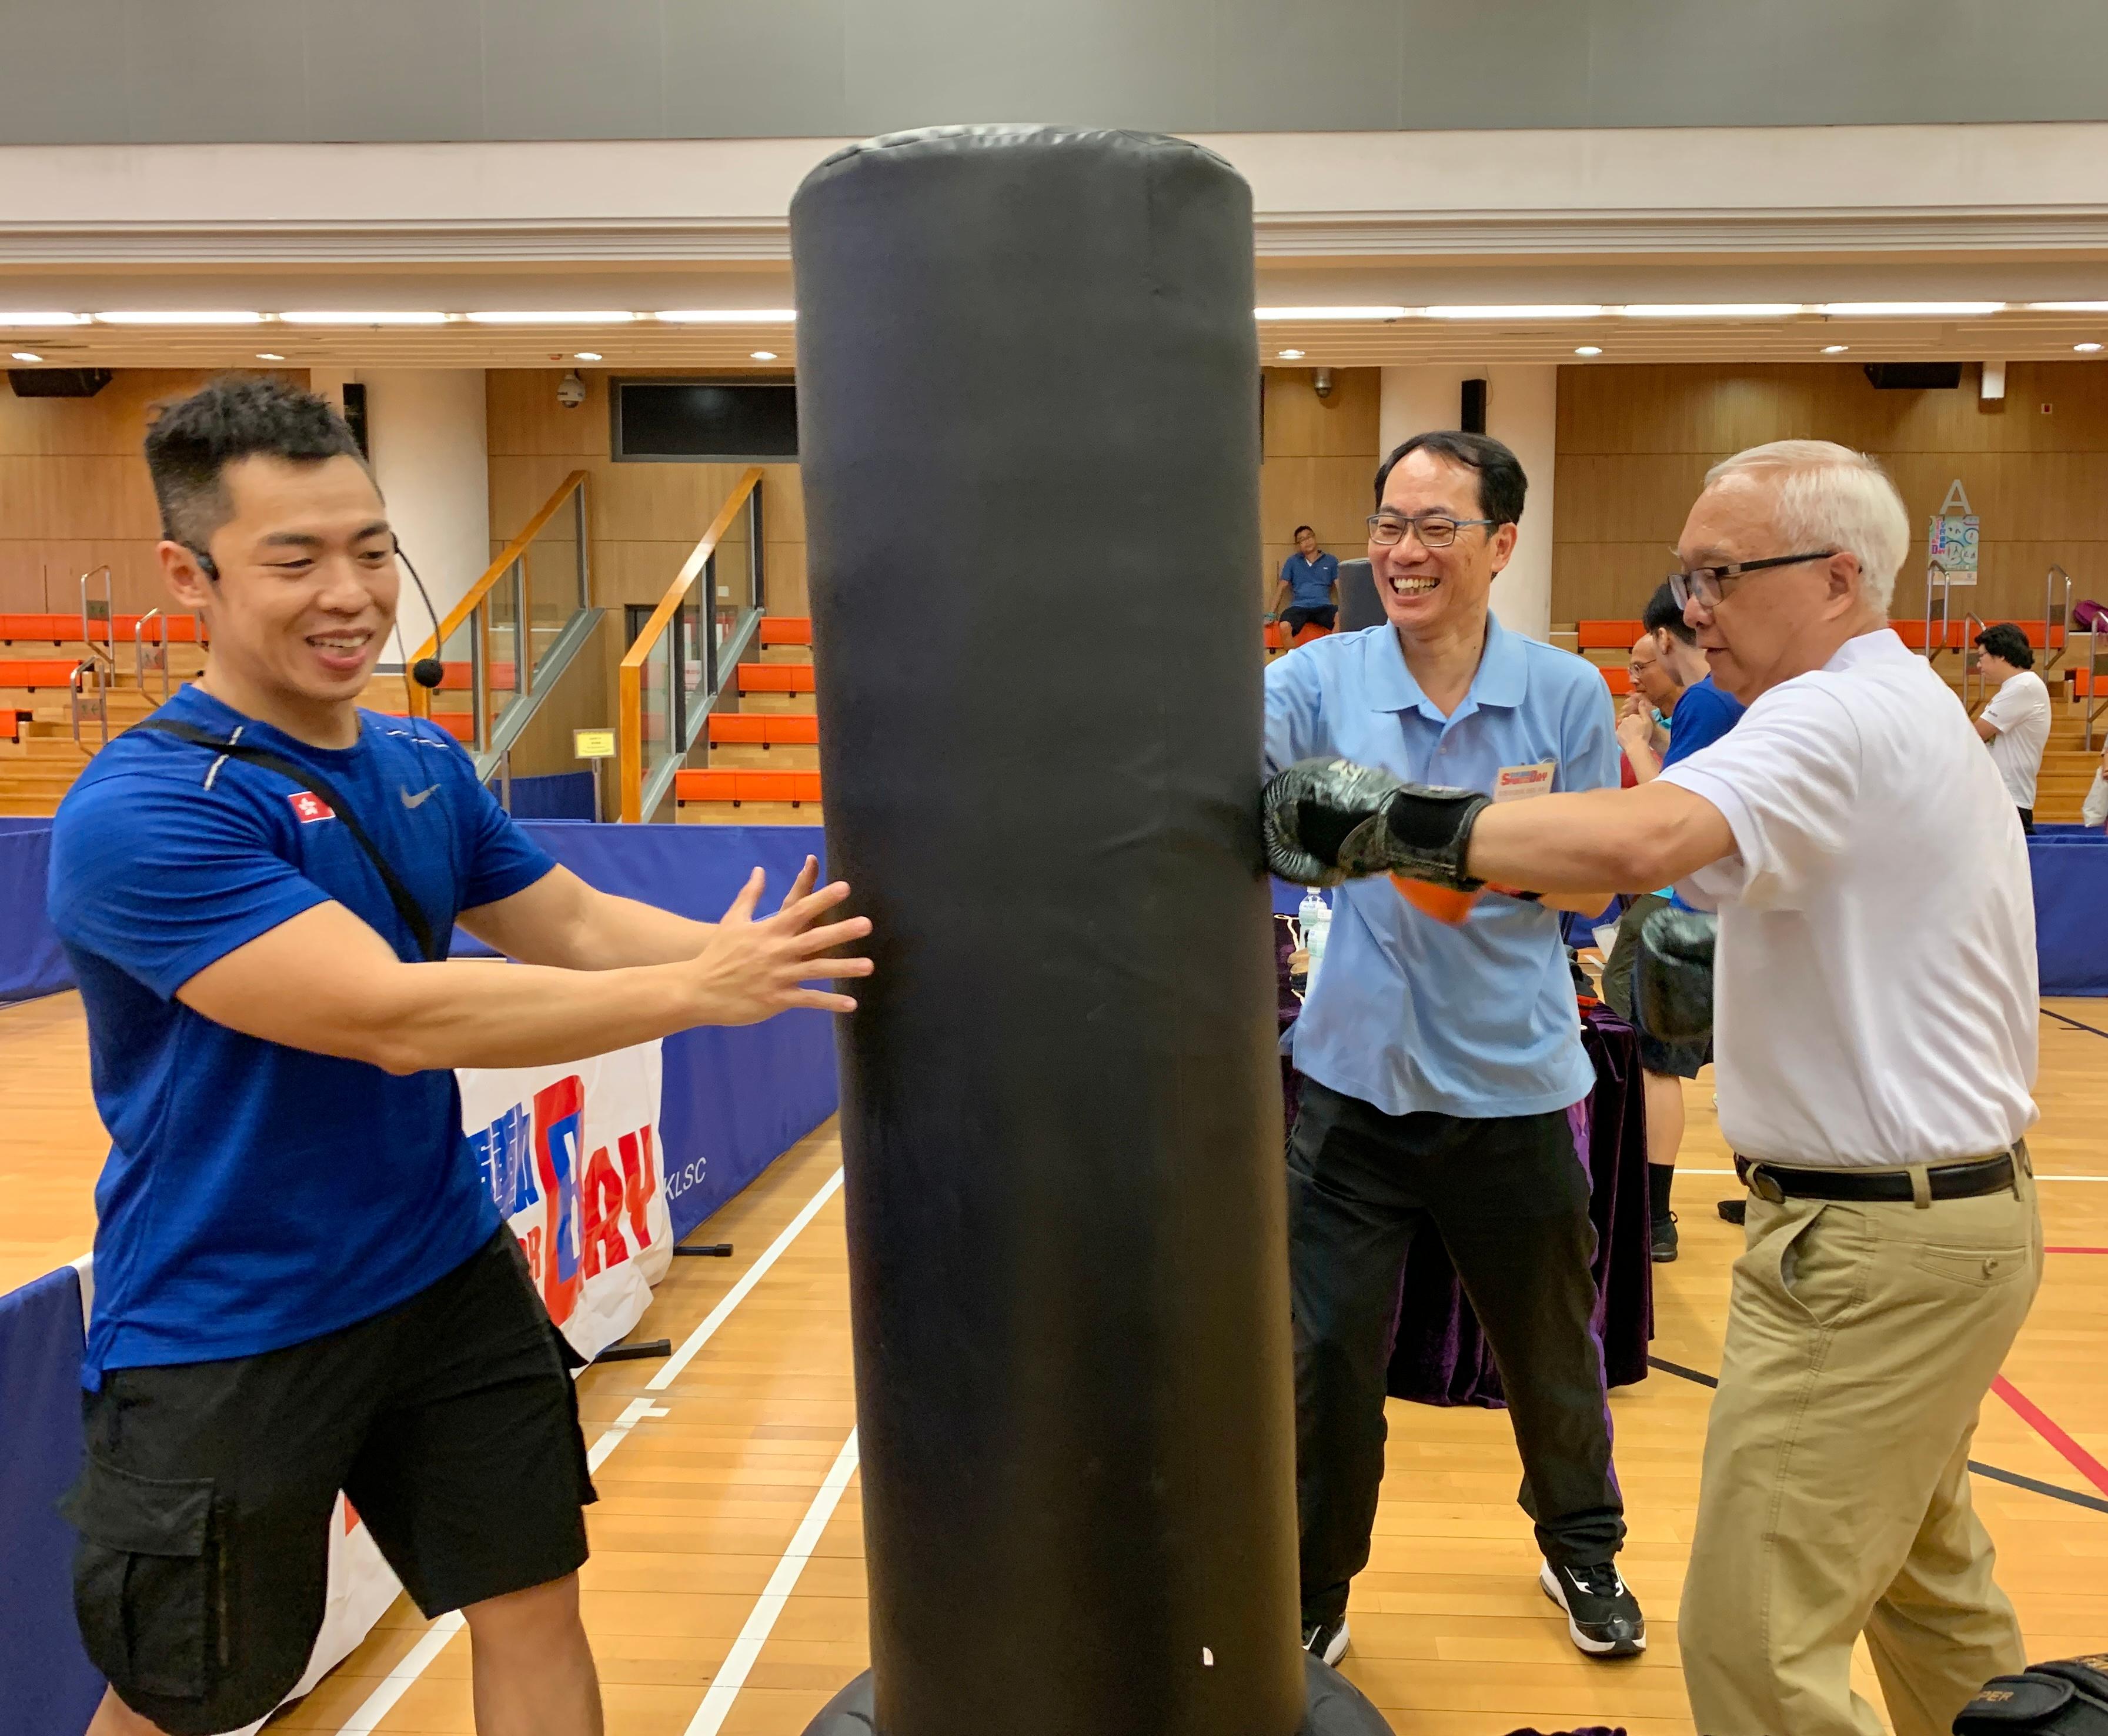 The Secretary for Environment and Ecology, Mr Tse Chin-wan (first right), supported and joined the recreation activities as part of the Sport For All Day 2023 organised by the Leisure and Cultural Services Department at Tiu Keng Leng Sports Centre this afternoon (August 6).